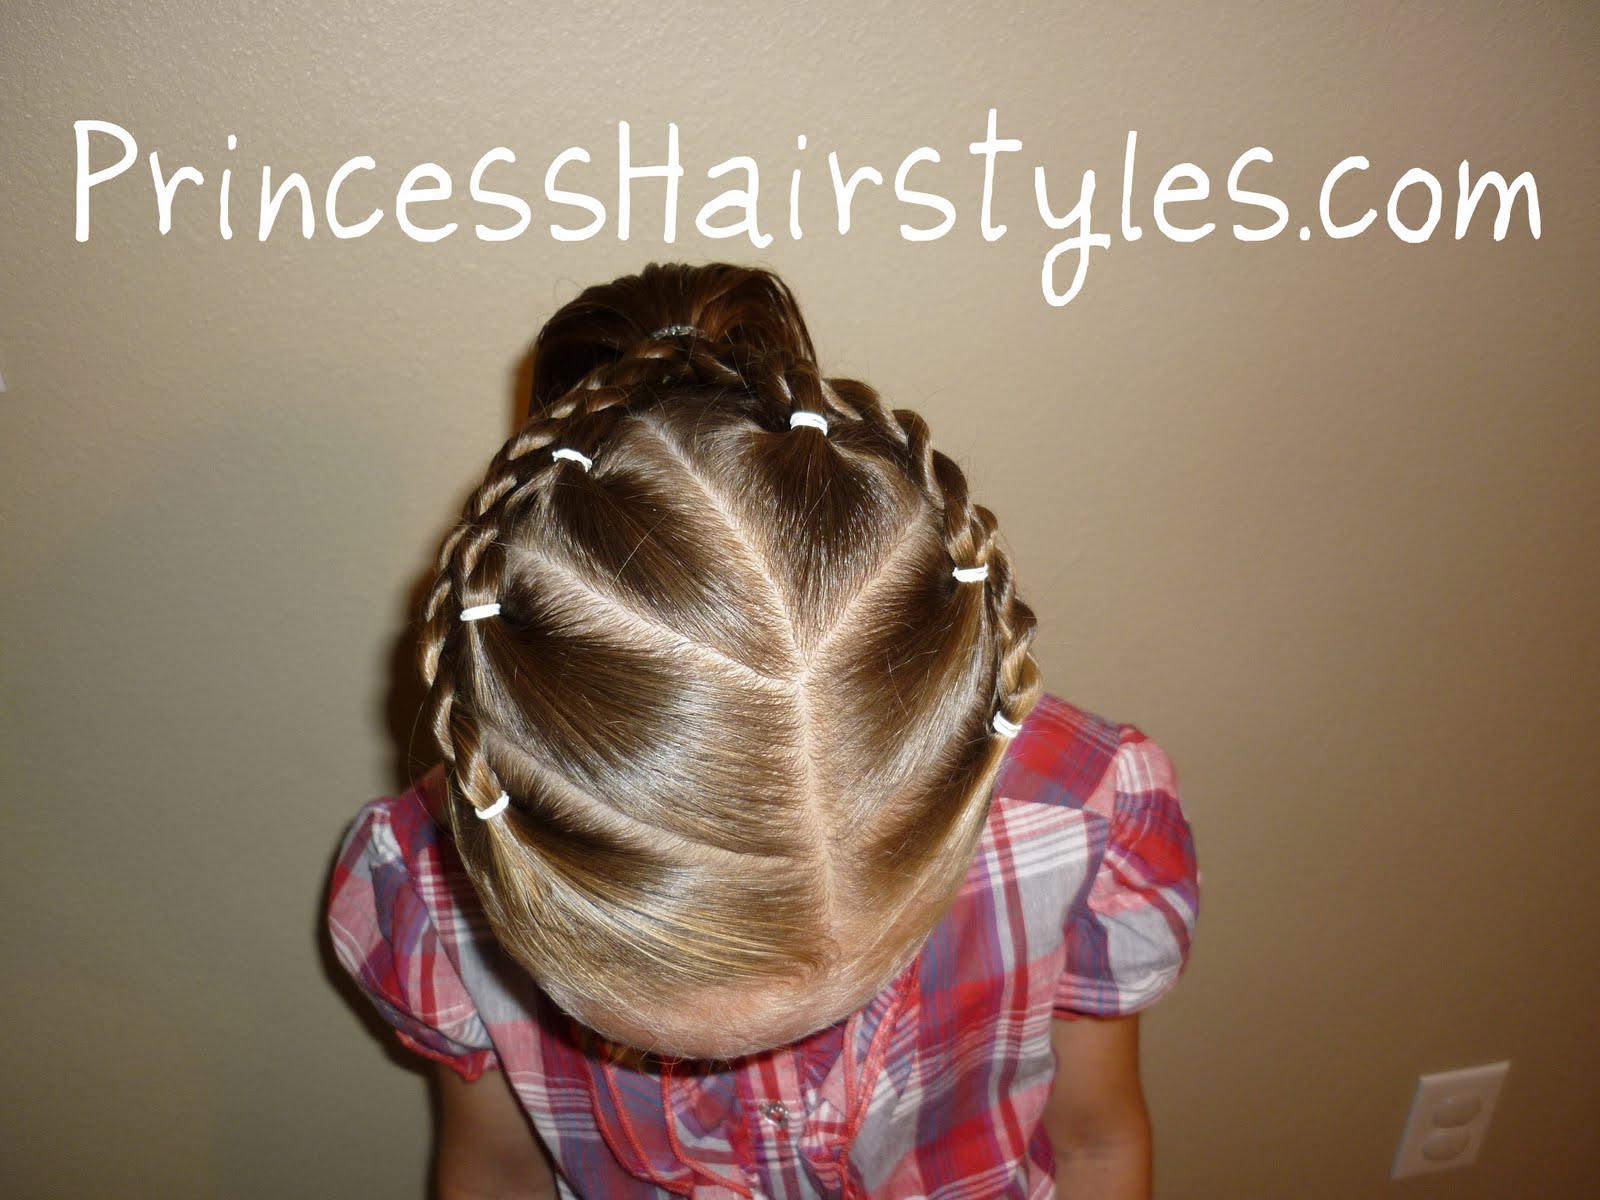 Cute Hairstyle For Sports | Hairstyles For Girls - Princess Hairstyles